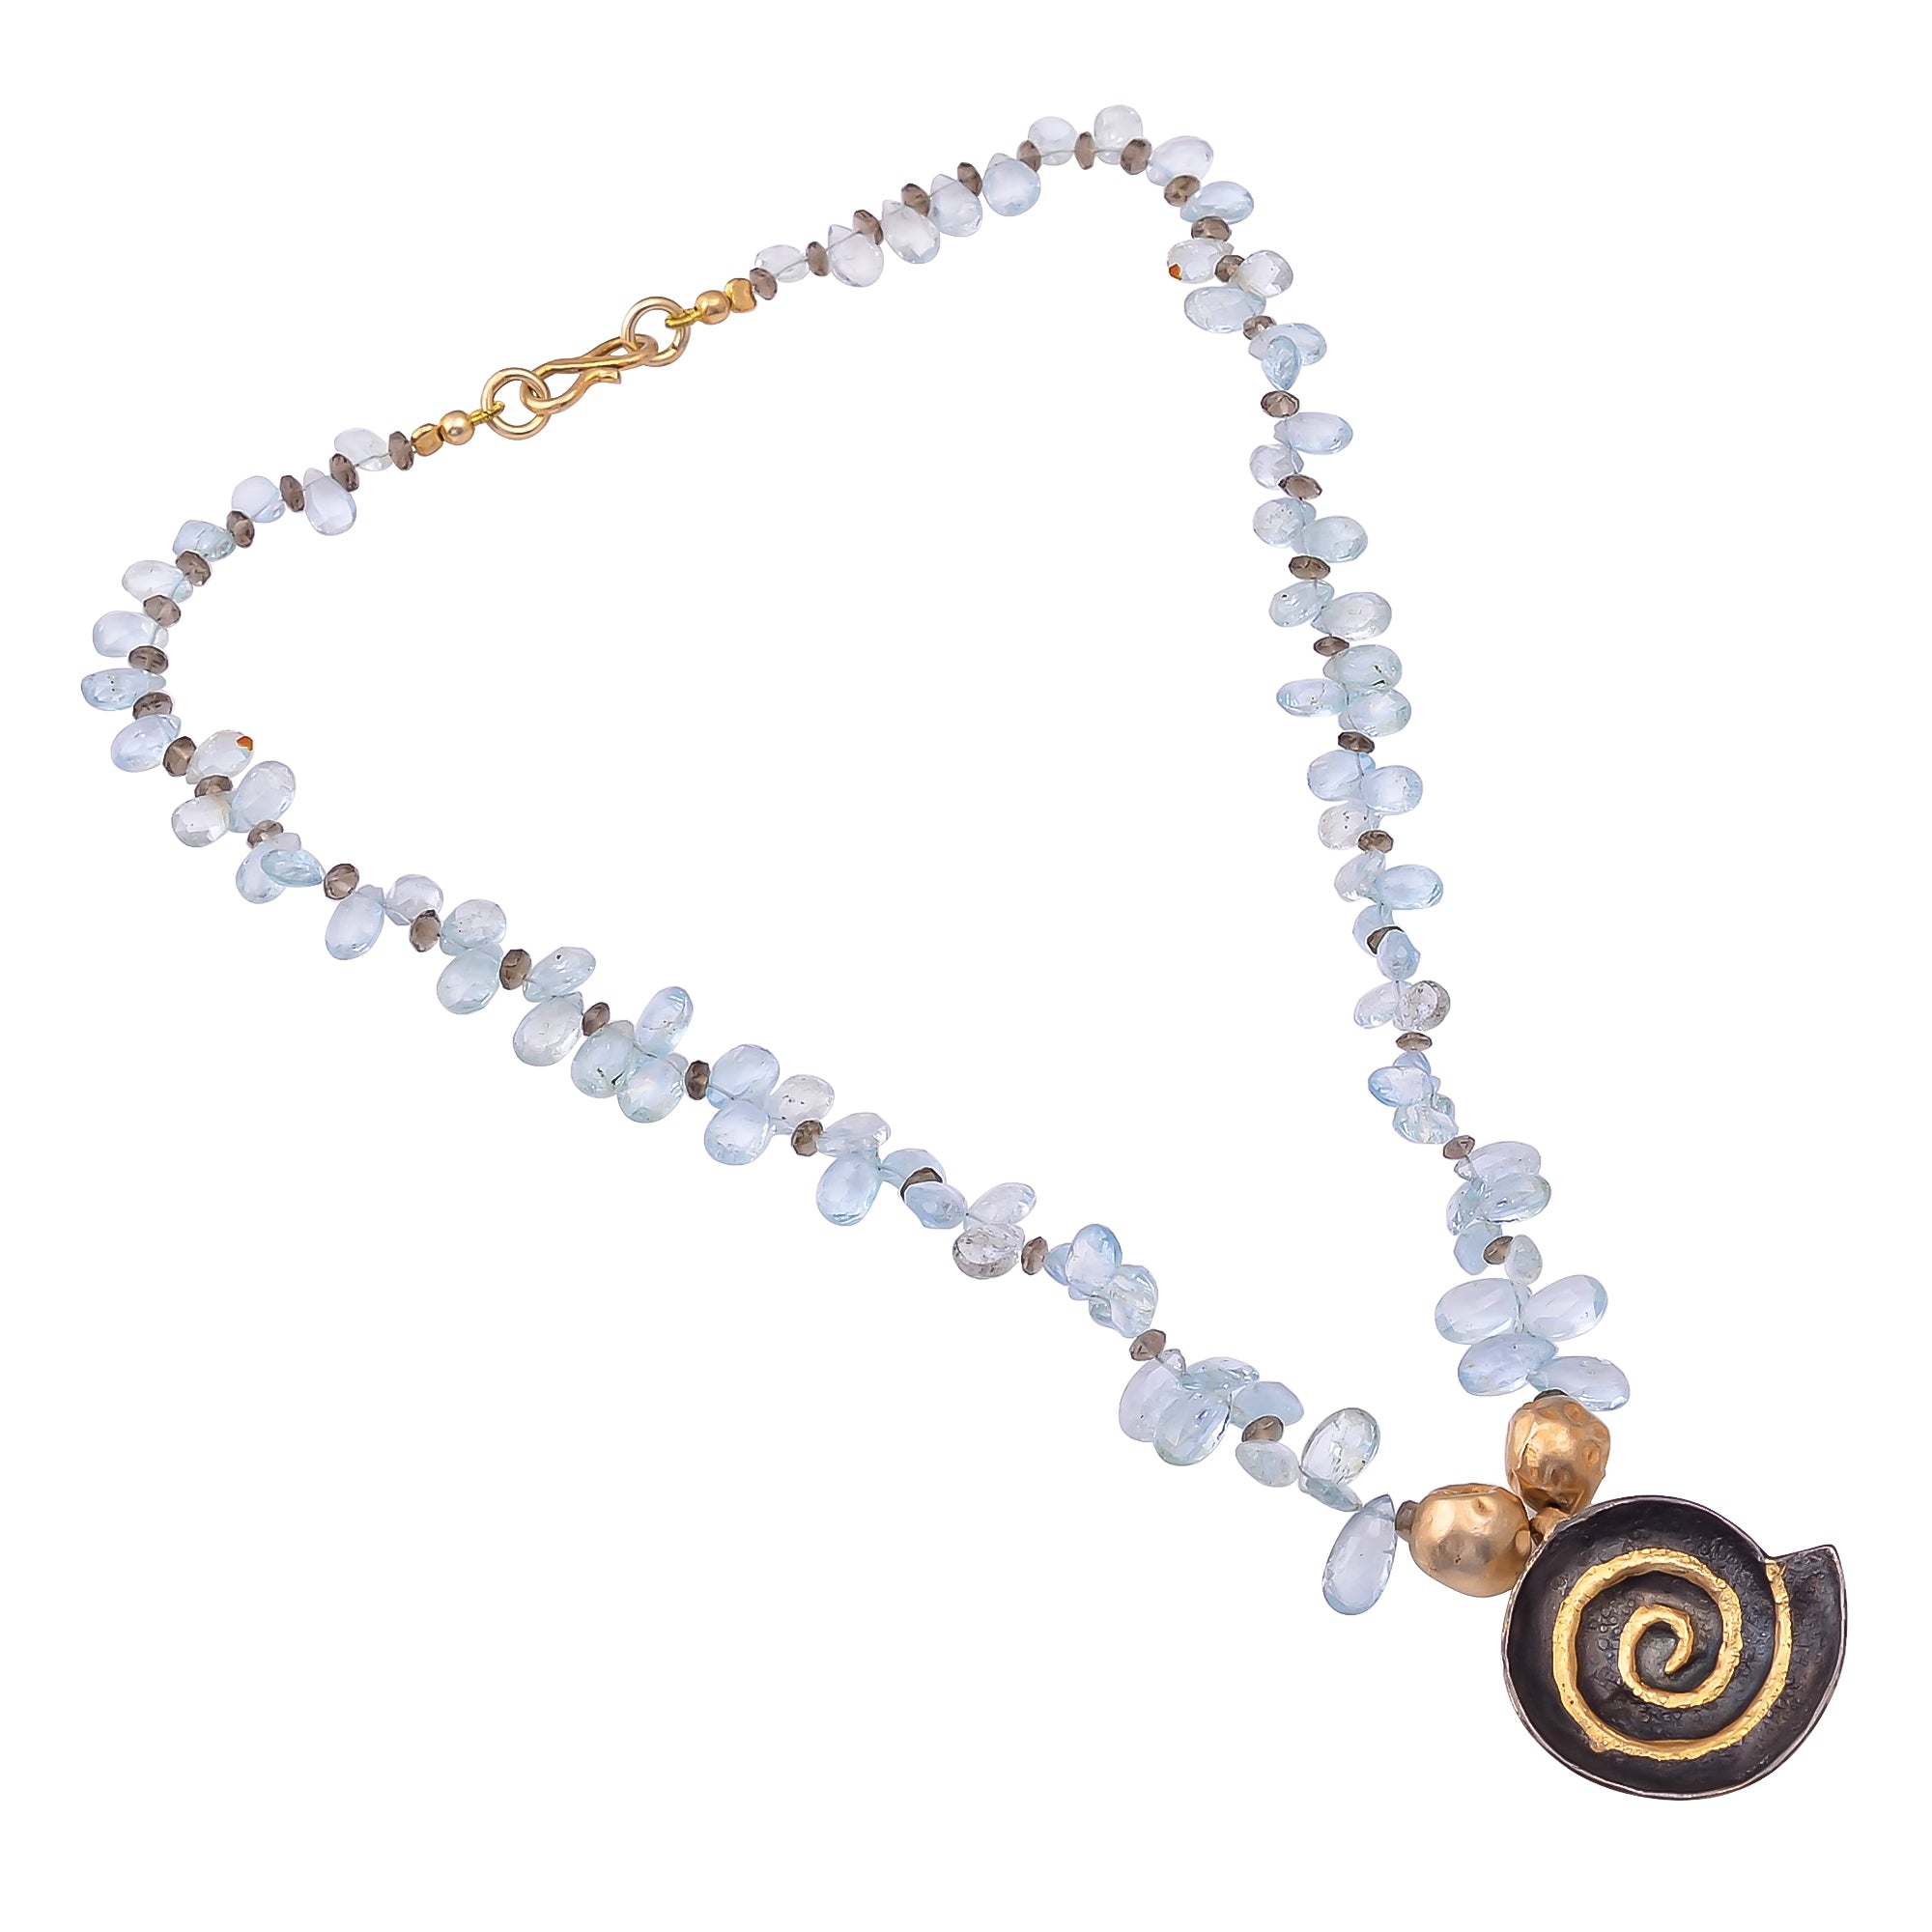 Buy Indian Handcrafted Silver Gold Black Plated Spiral Pendant With Aquamarine/smoky Necklace